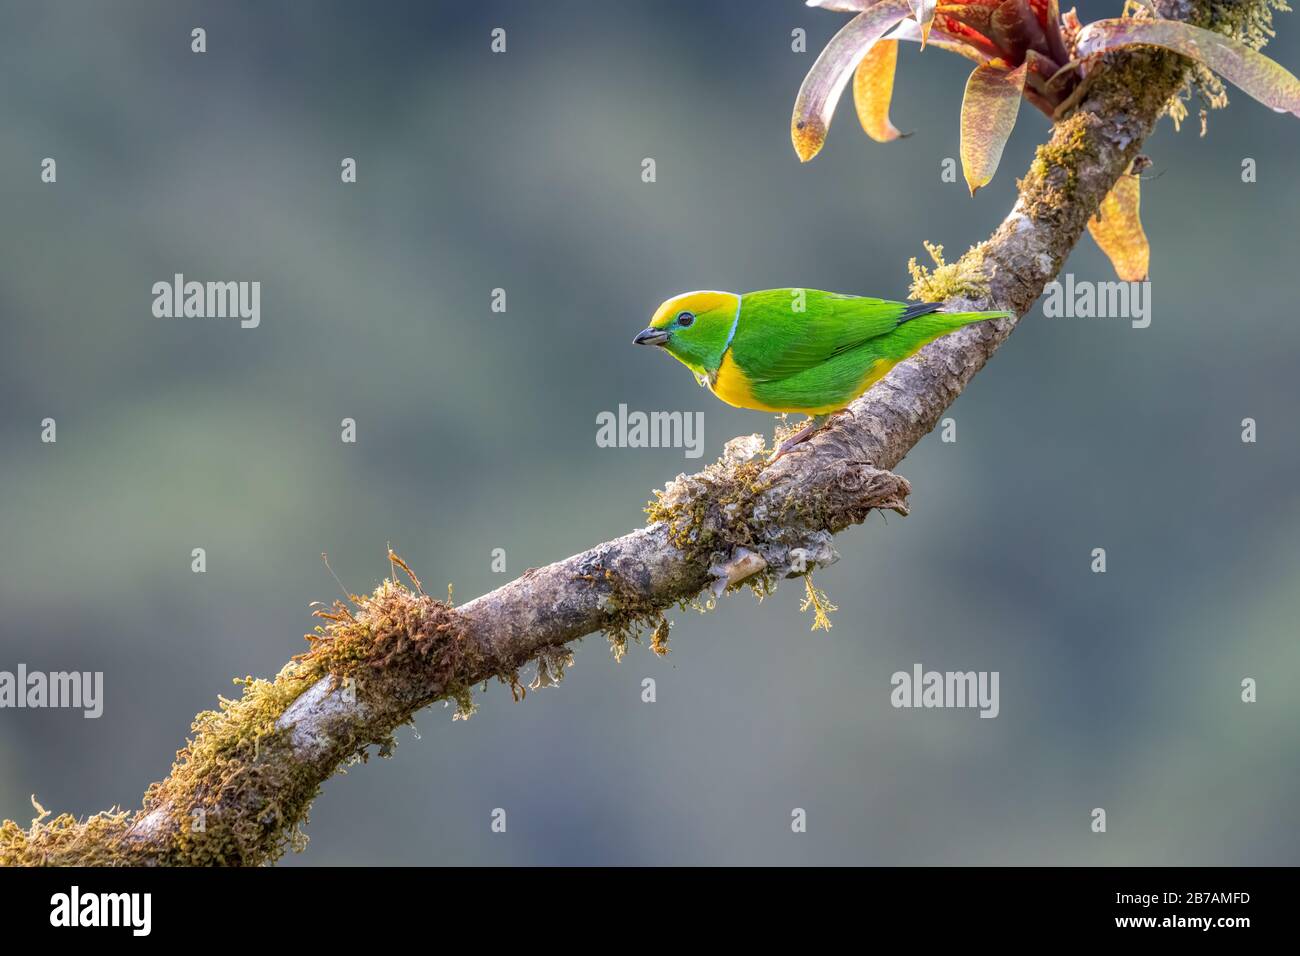 A Golden-browed Chlorophonia (Chlorophonia callophrys) rests on a branch in the cloudforest of San Gerardo de Dota, Costa Rica. Stock Photo